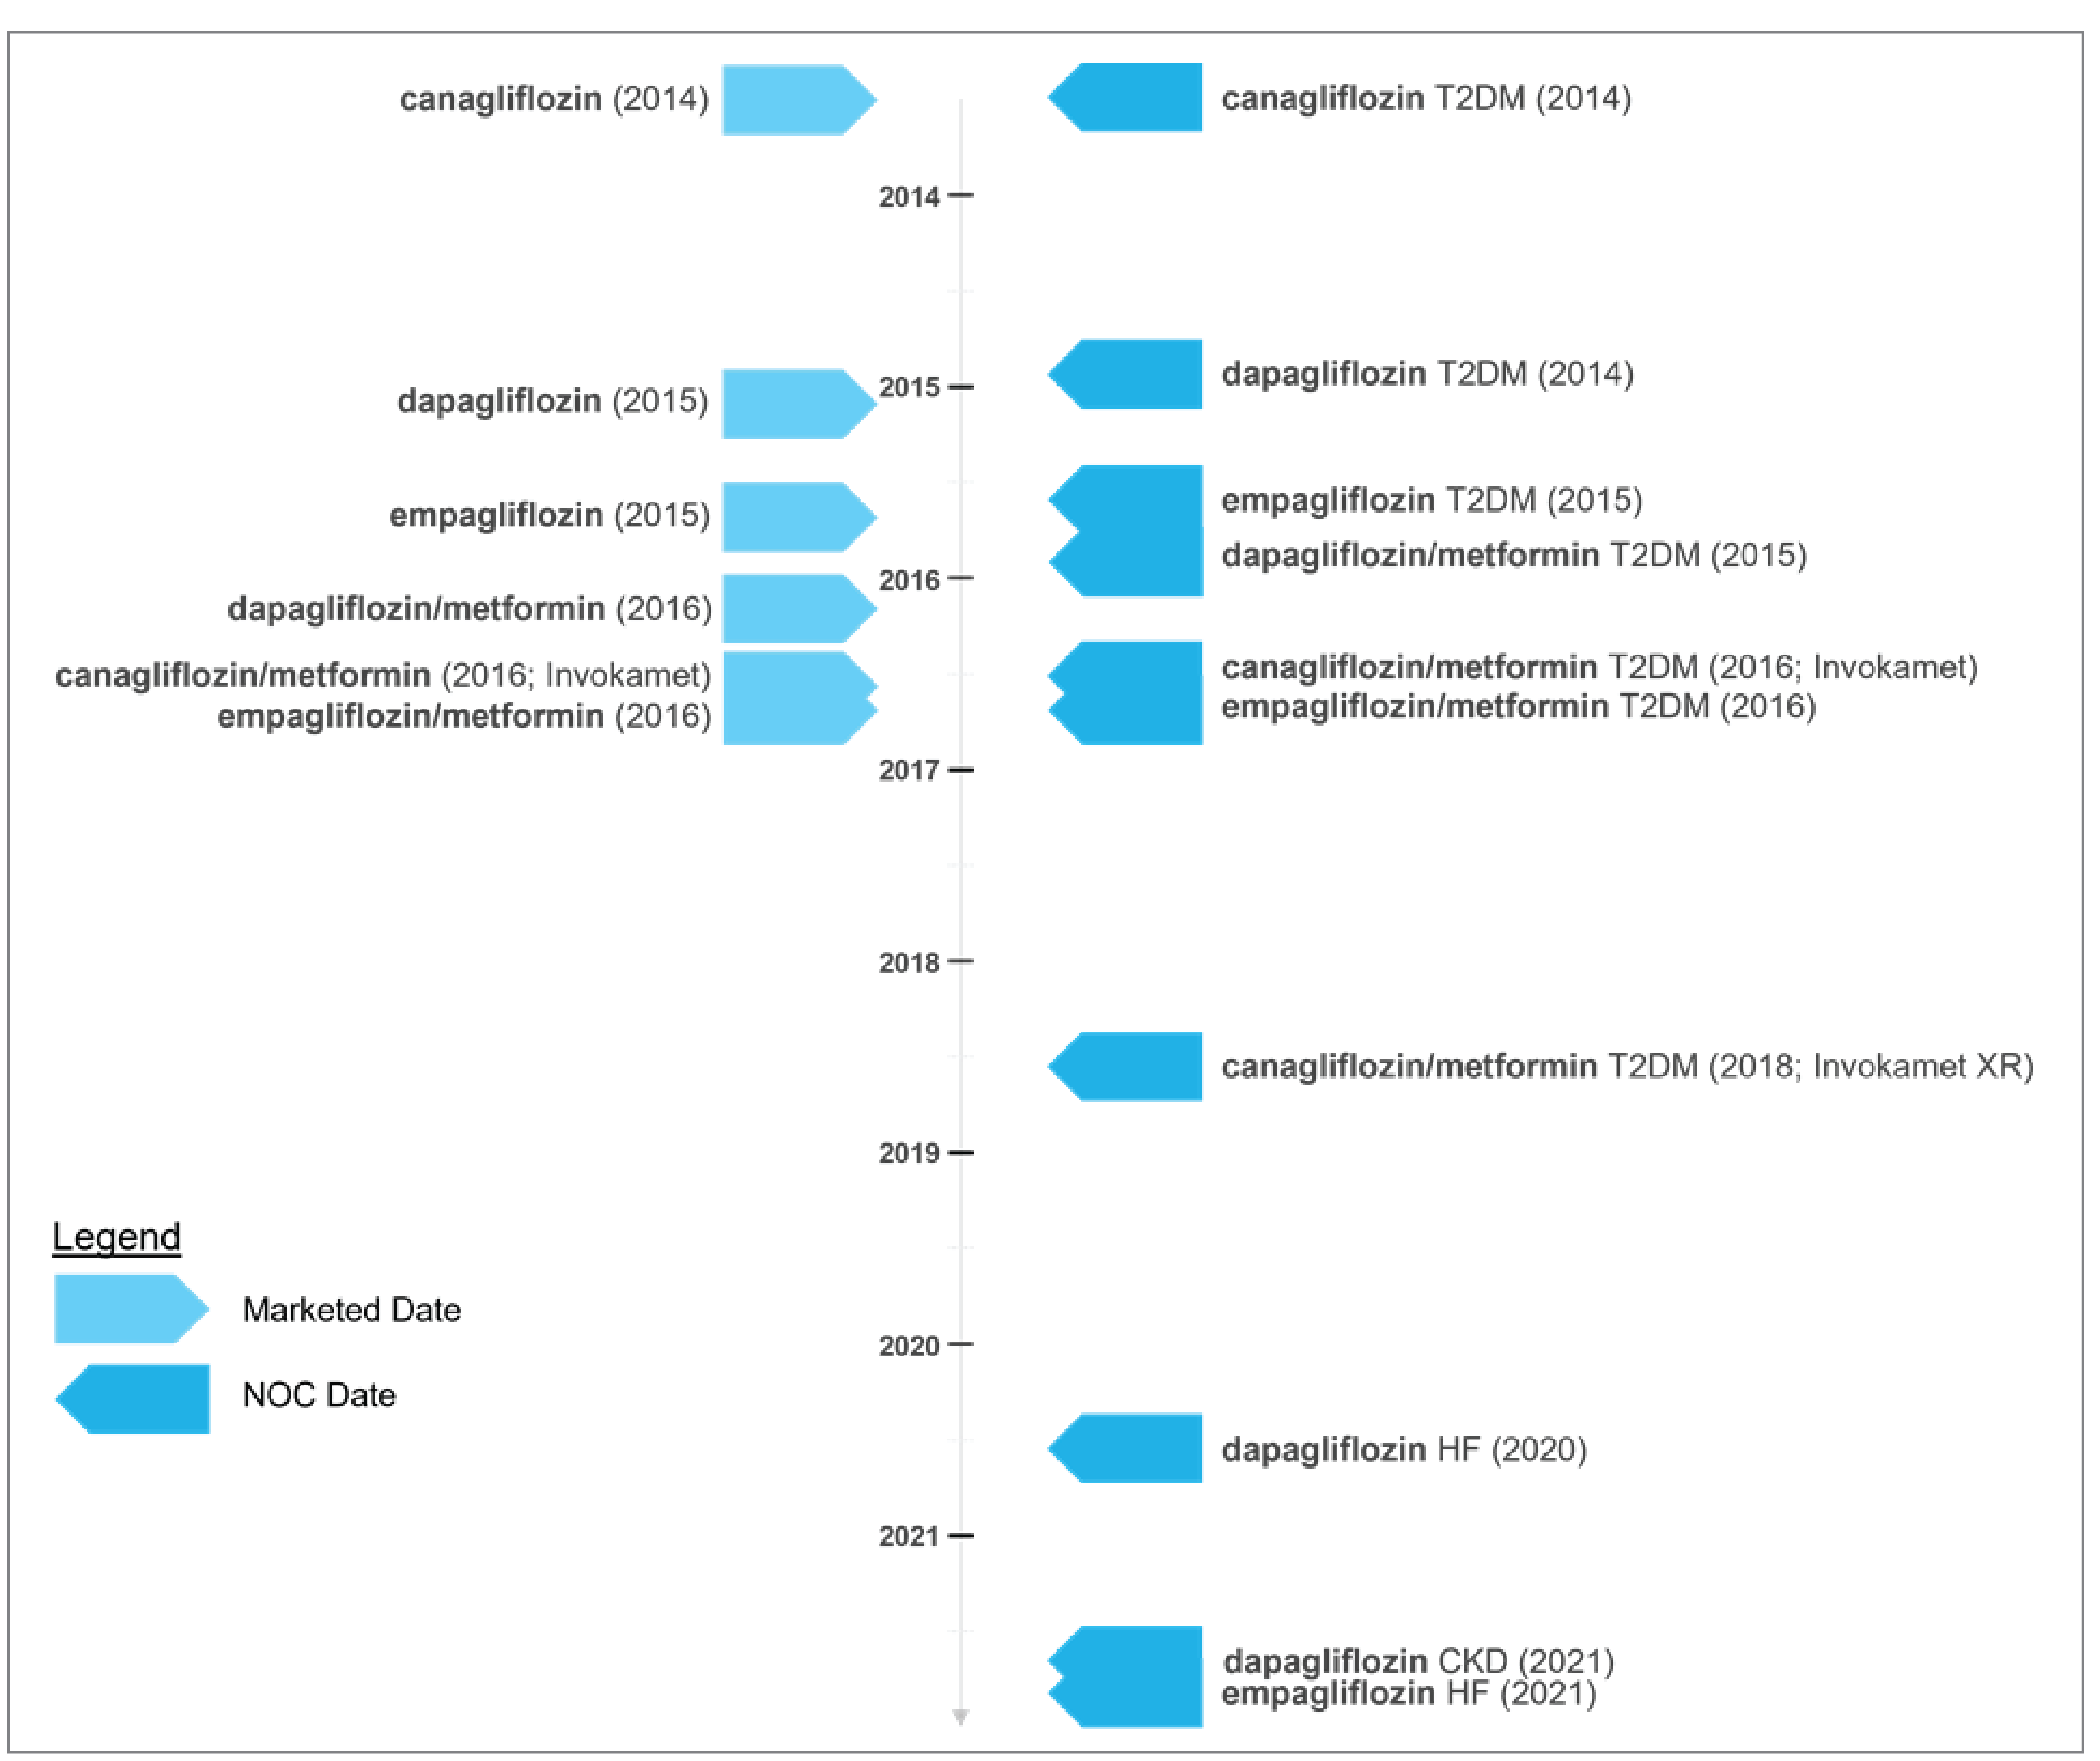 Timeline of Health Canada approvals for SGLT2 inhibitors by marketed date and Notice of Compliance date for each Health Canada indication. Canagliflozin was the first SGLT2 inhibitor approved for type 2 diabetes mellitus, followed by dapagliflozin and empagliflozin. As each SGLT2 has matured, additional Health Canada indications, including heart failure and chronic kidney disease, have been added.